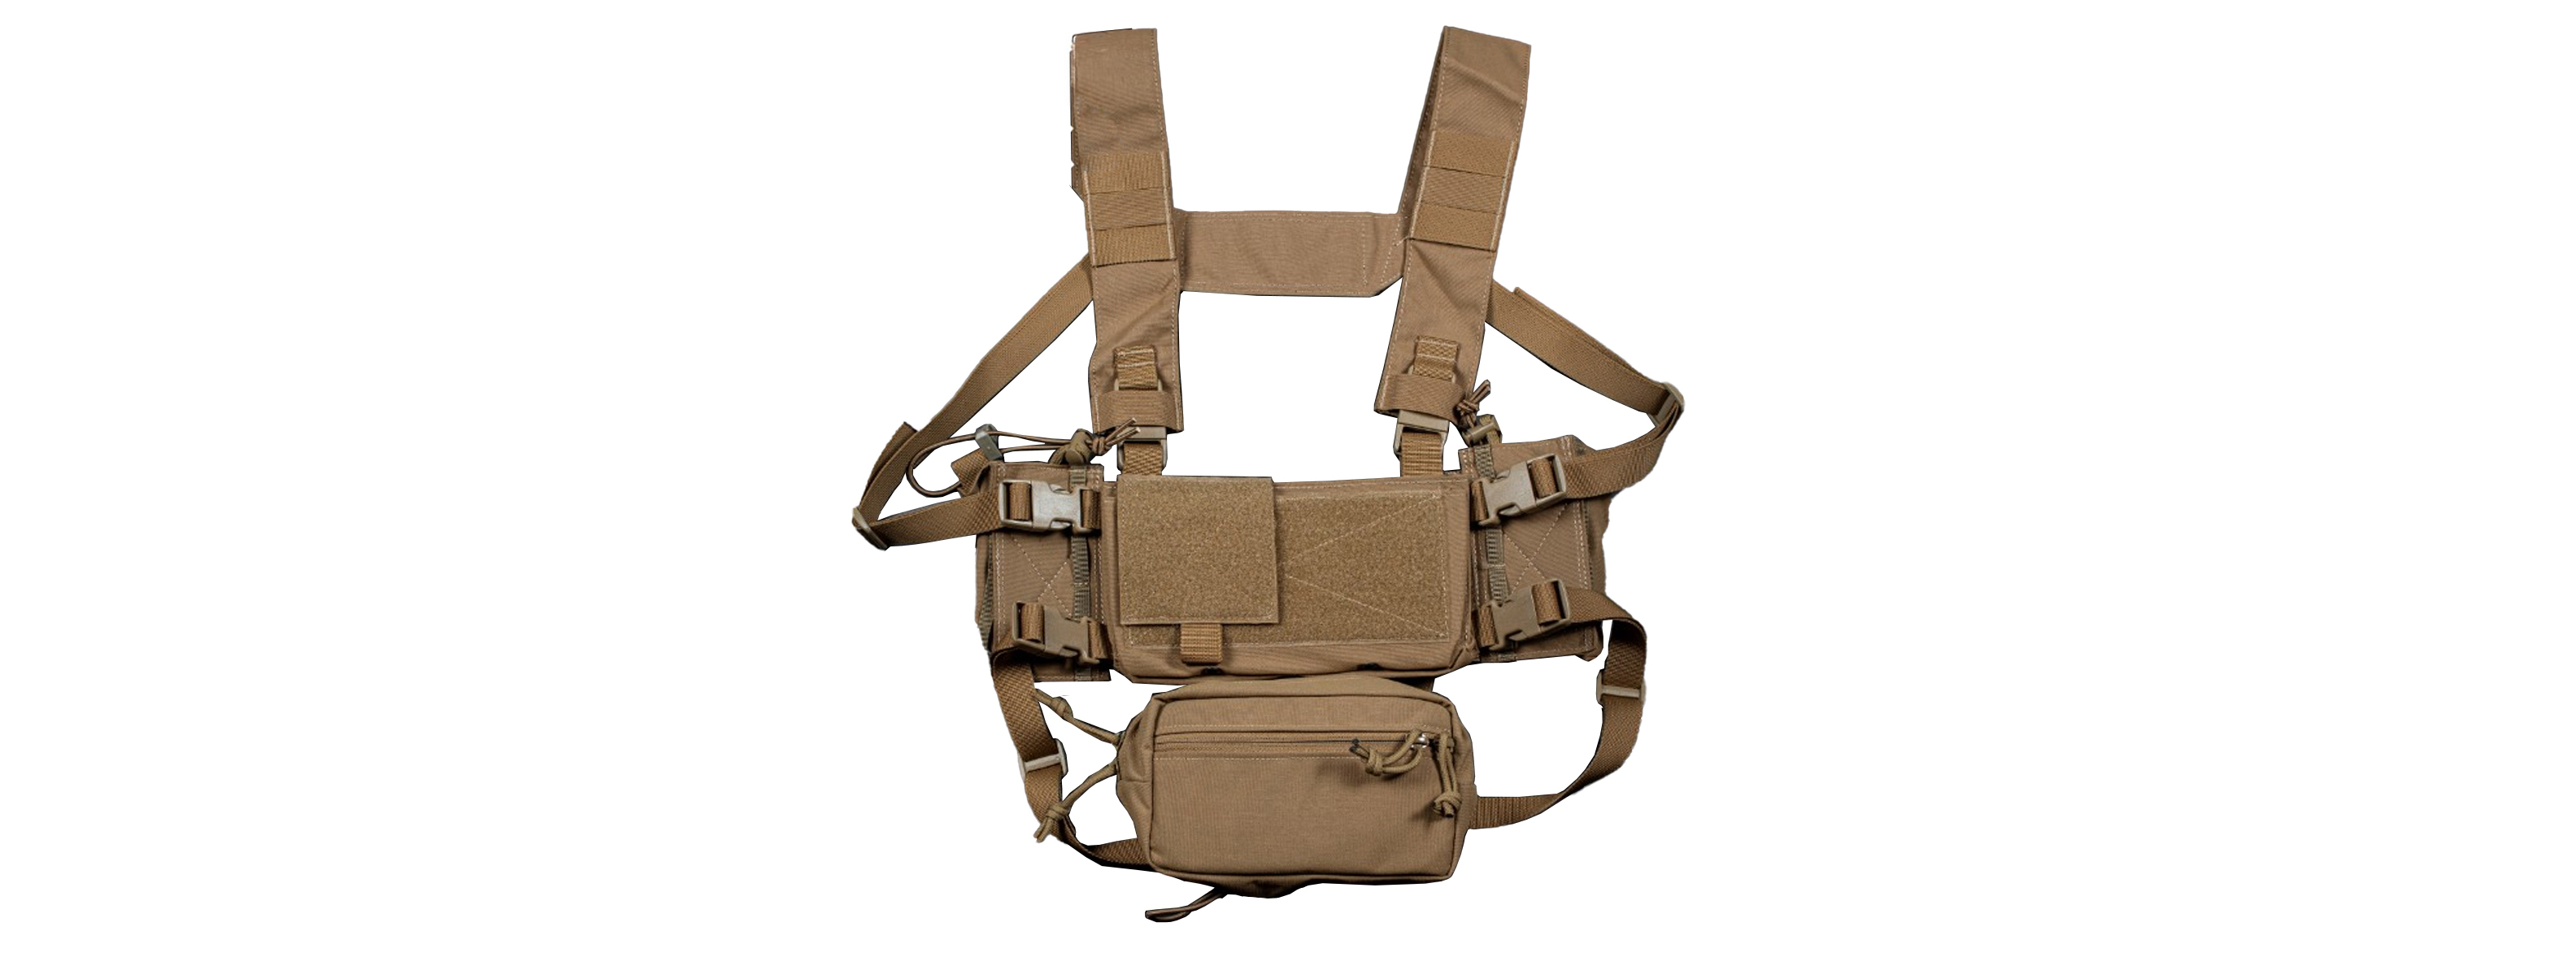 MK4 Tactical Chest Rig Carrier - (Tan)